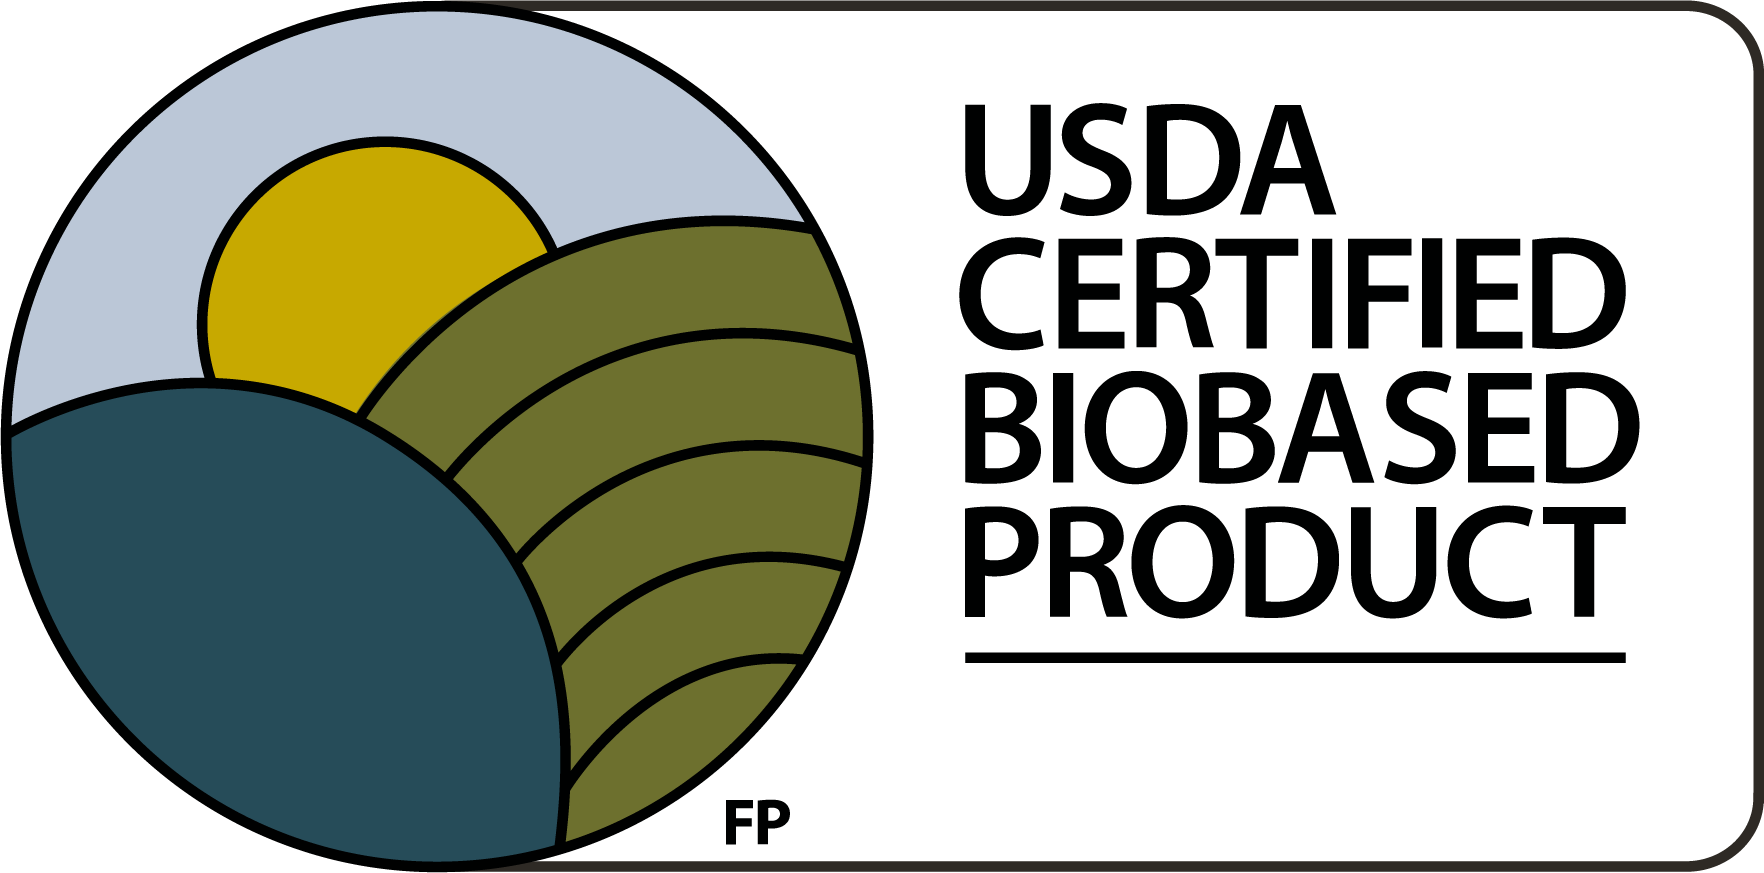 USDA Certified Biobased Product icon